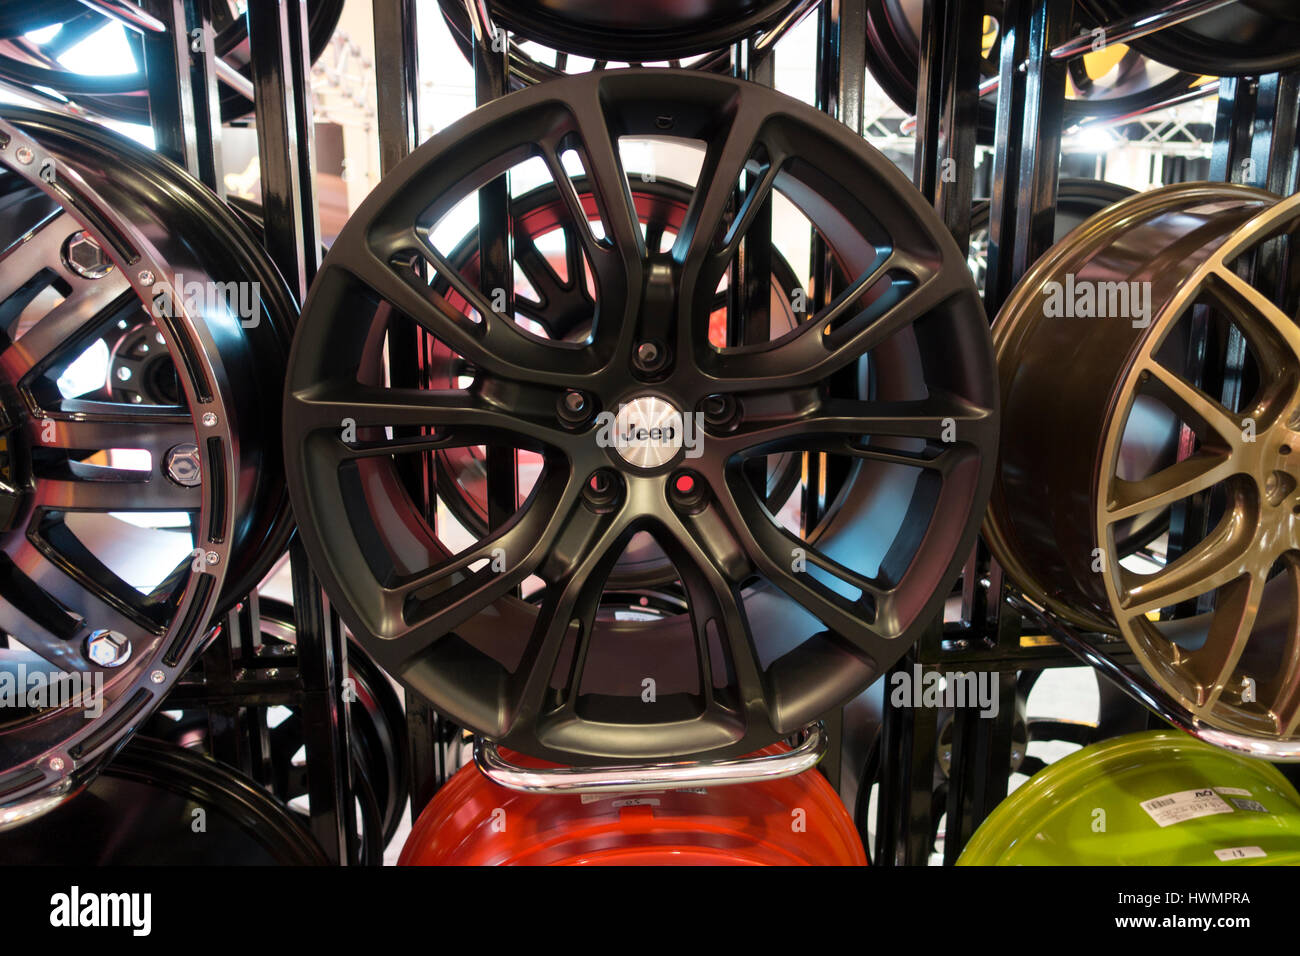 A Retail Display Of An Aftermarket Black Replacement Wheel For A Jeep 4x4 Truck The Jeep wheel, Grand Cherokee Stock Photo